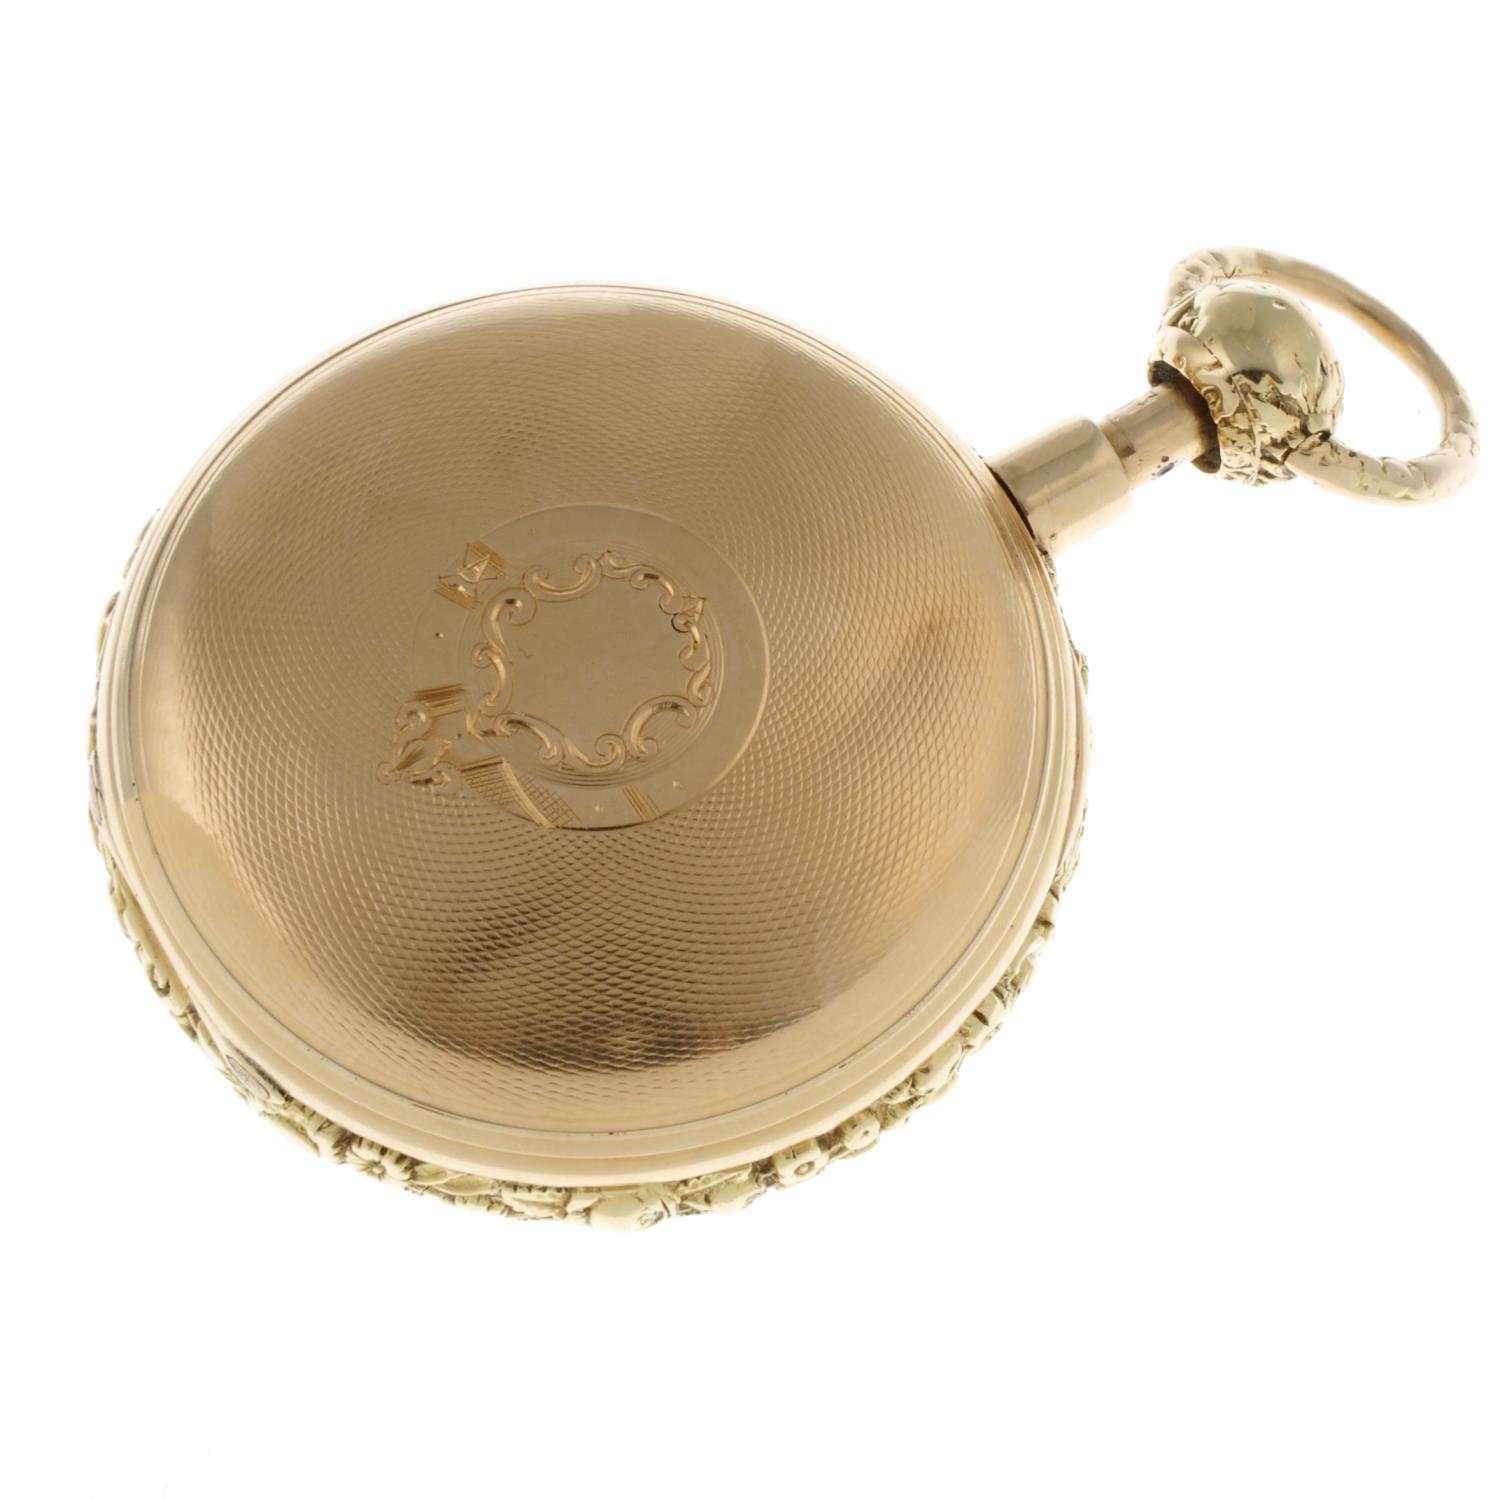 An open face repeater pocket watch. - Image 2 of 5